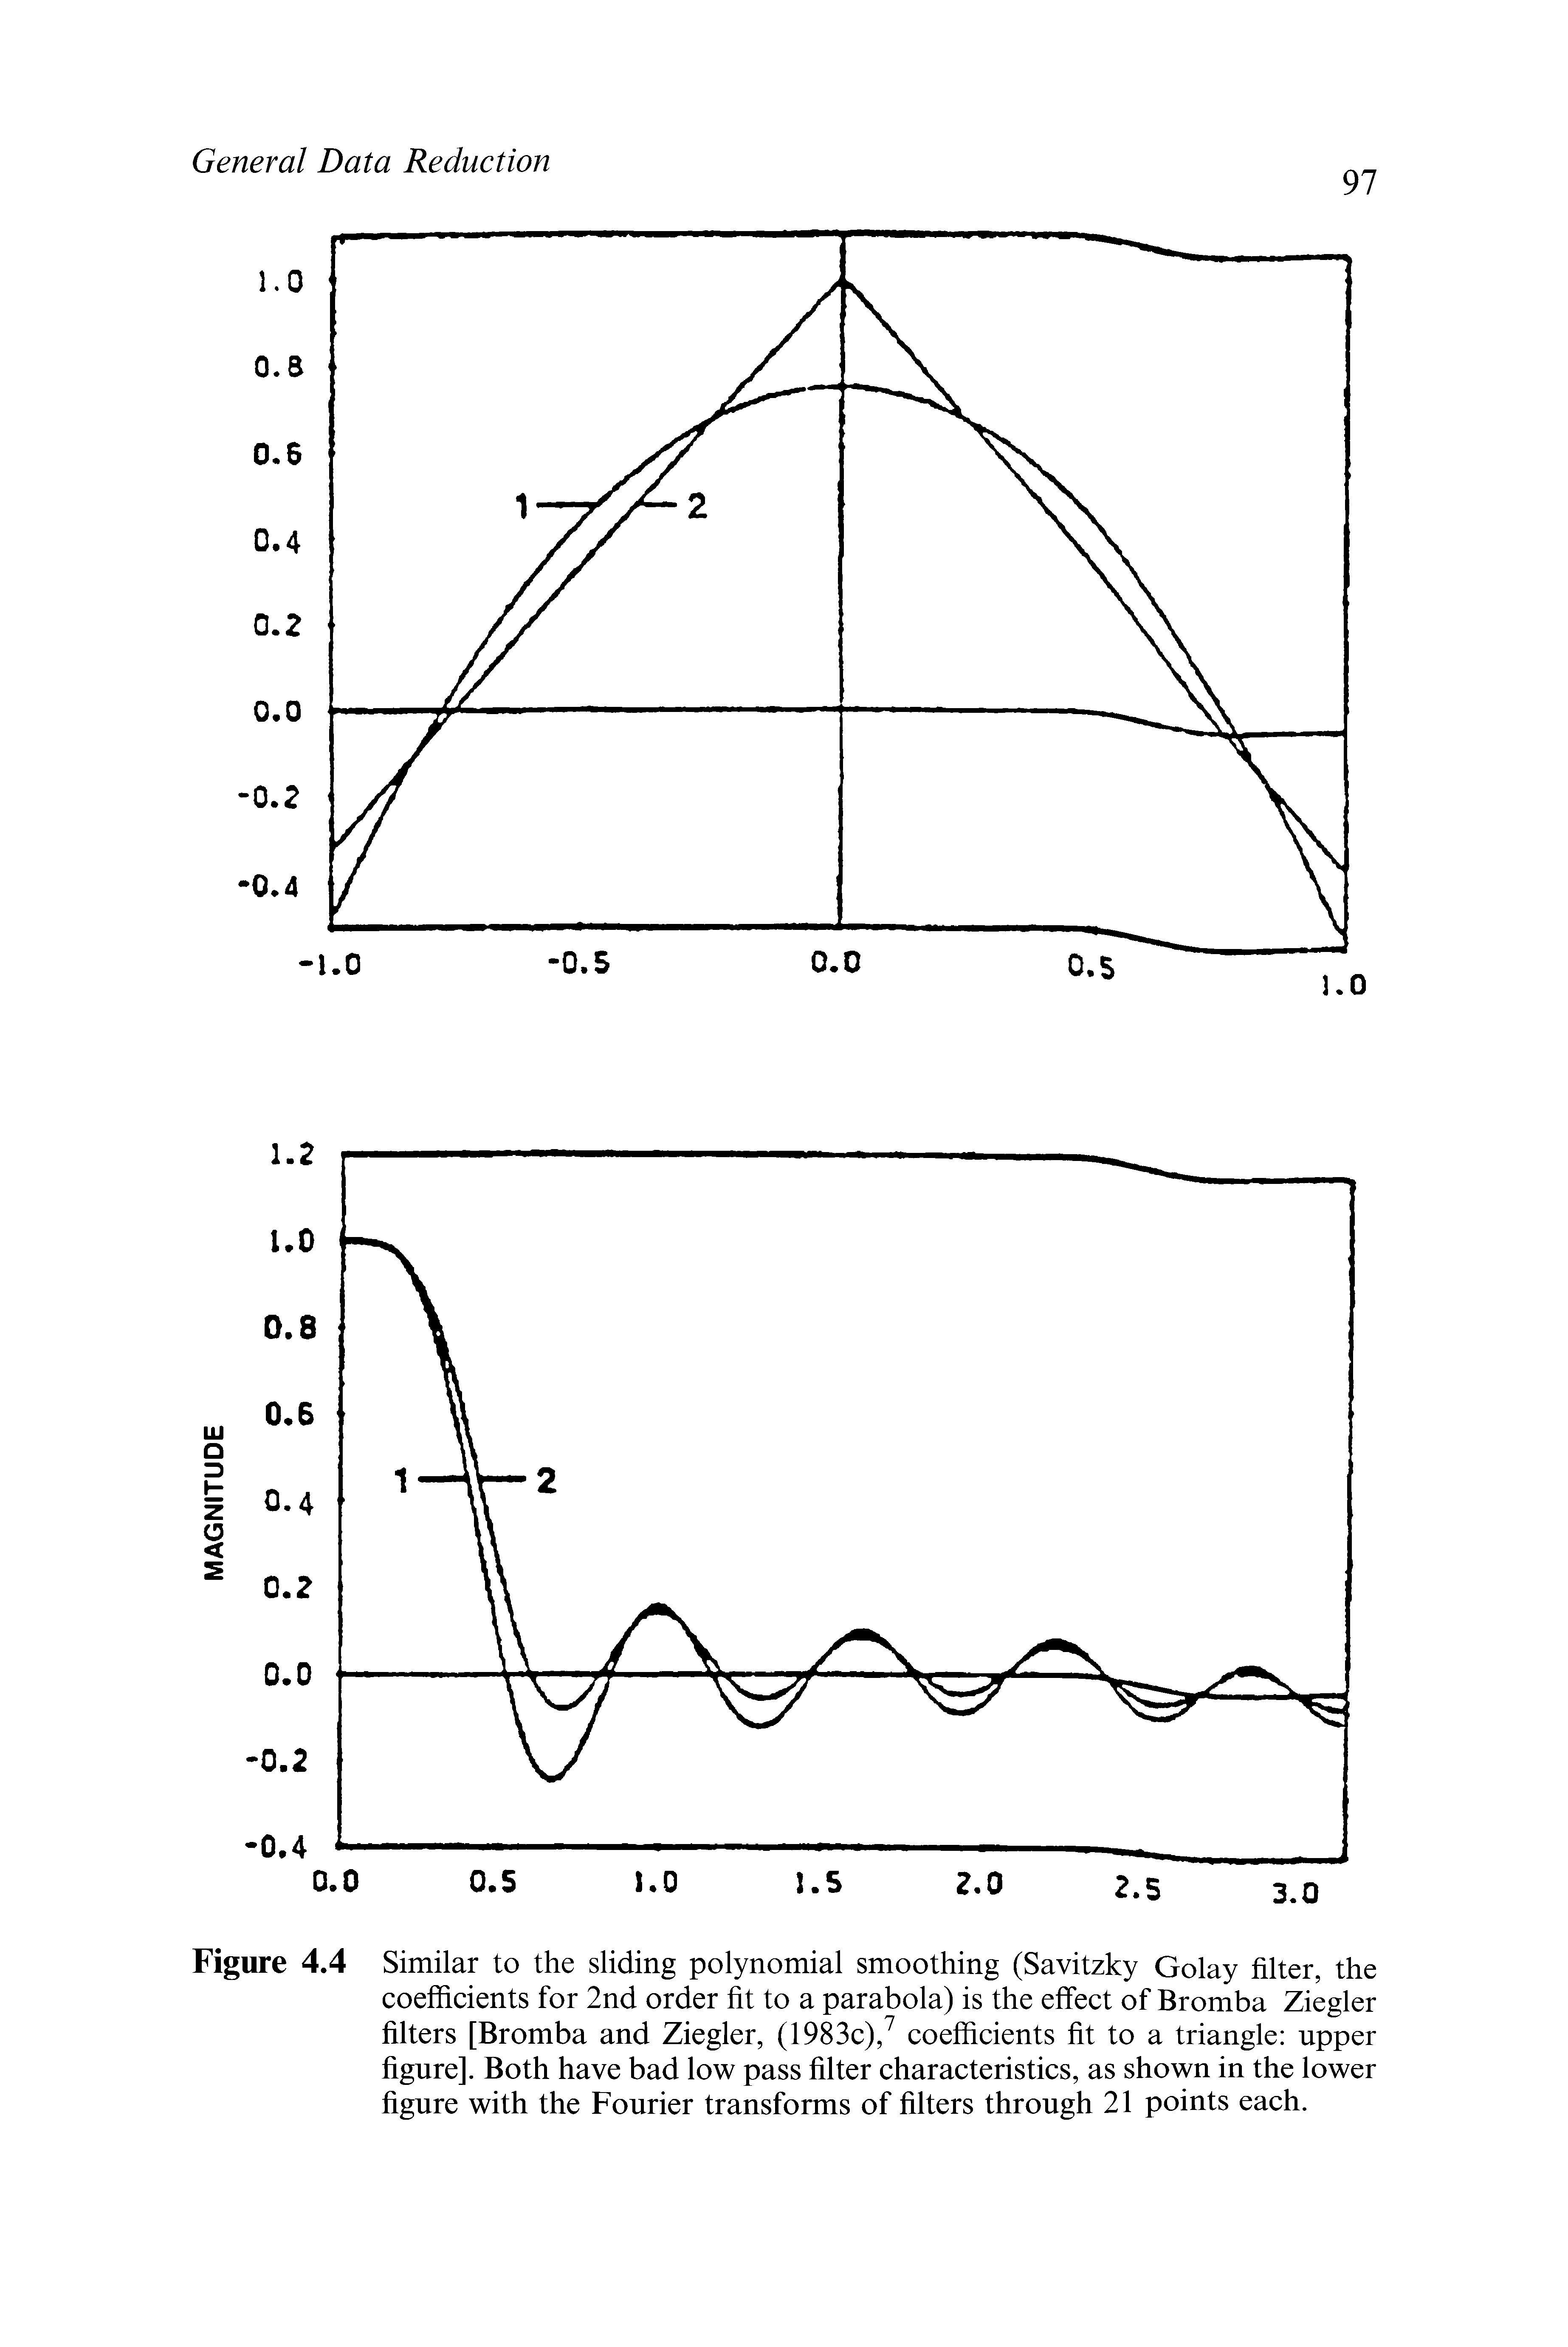 Figure 4.4 Similar to the sliding polynomial smoothing (Savitzky Golay filter, the coefficients for 2nd order fit to a parabola) is the effect of Bromba Ziegler filters [Bromba and Ziegler, (1983c), coefficients fit to a triangle upper figure]. Both have bad low pass filter characteristics, as shown in the lower figure with the Fourier transforms of filters through 21 points each.